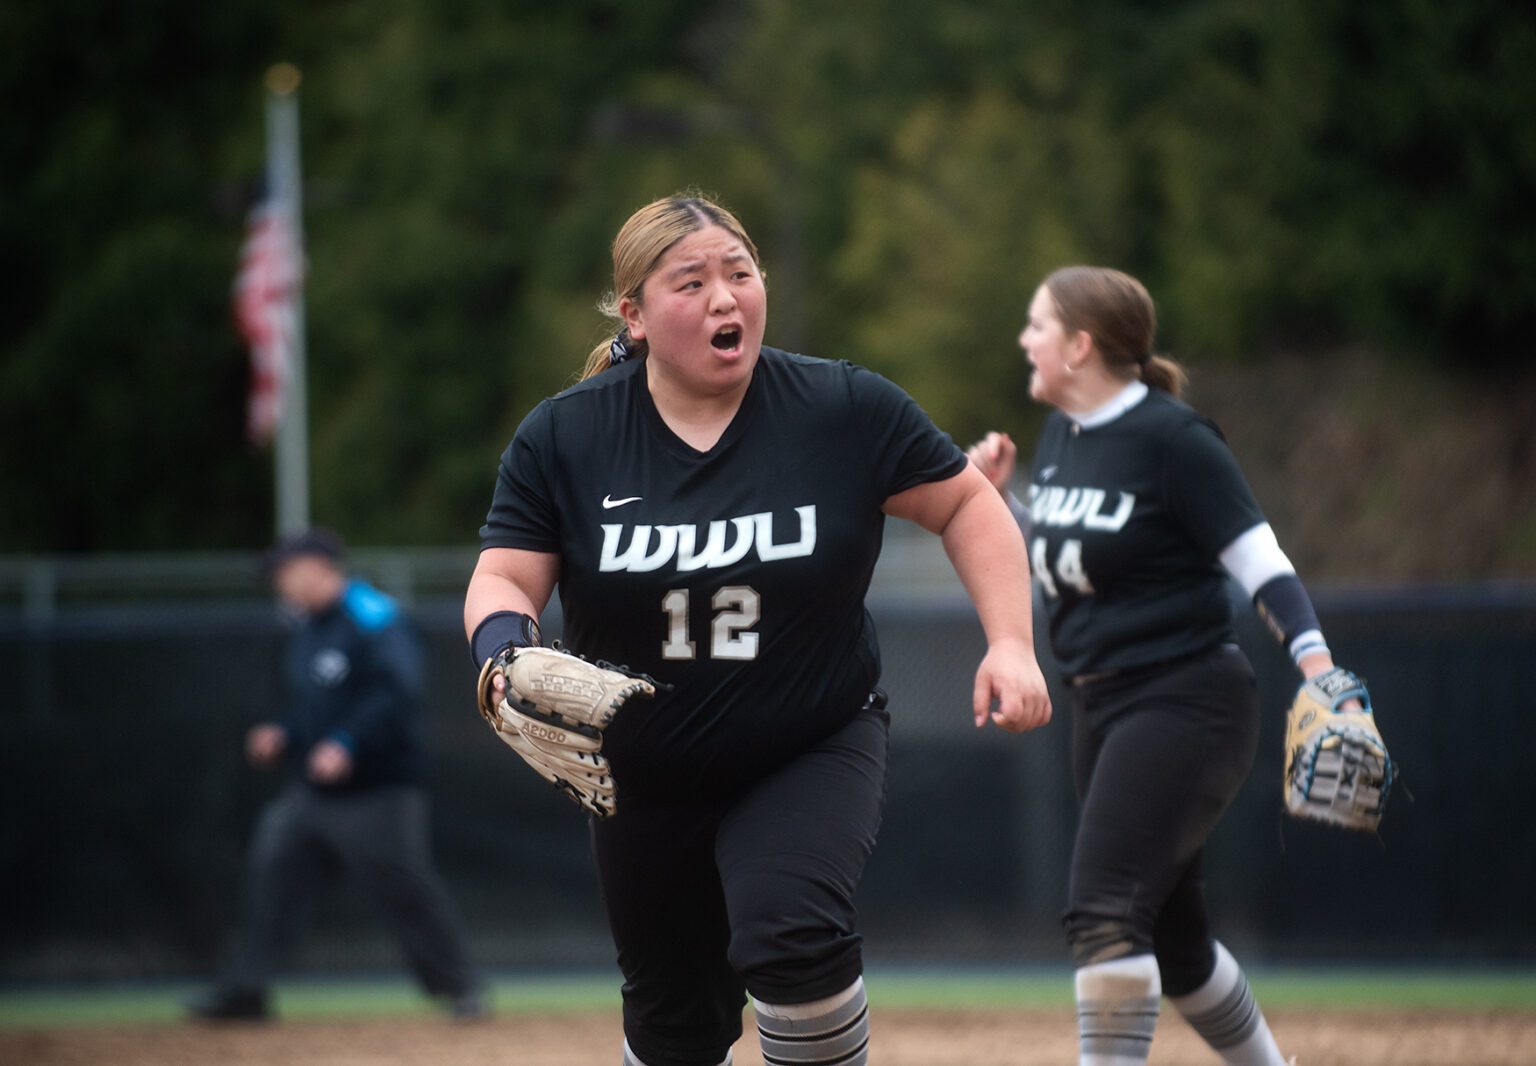 Western Washington University junior pitcher Hanako Hirai celebrates keeping the score tied 8-8 March 26 as Western lost the first game of a four-game series